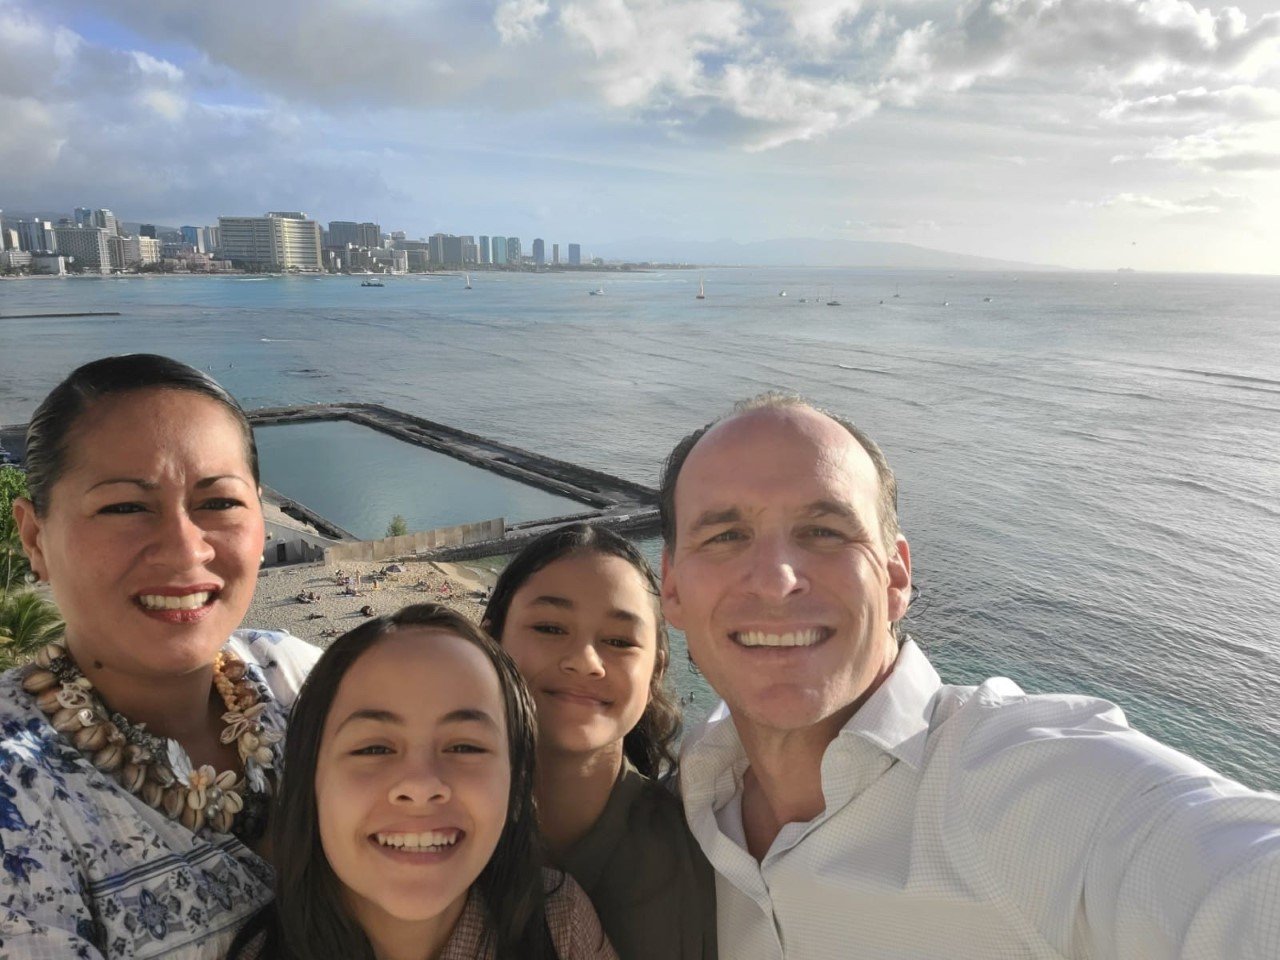  Mestraud shoots a family selfie with wife Johanna, and their 12-year-old daughters Jade and Manon ( photo courtesy Michael Mestraud ).  